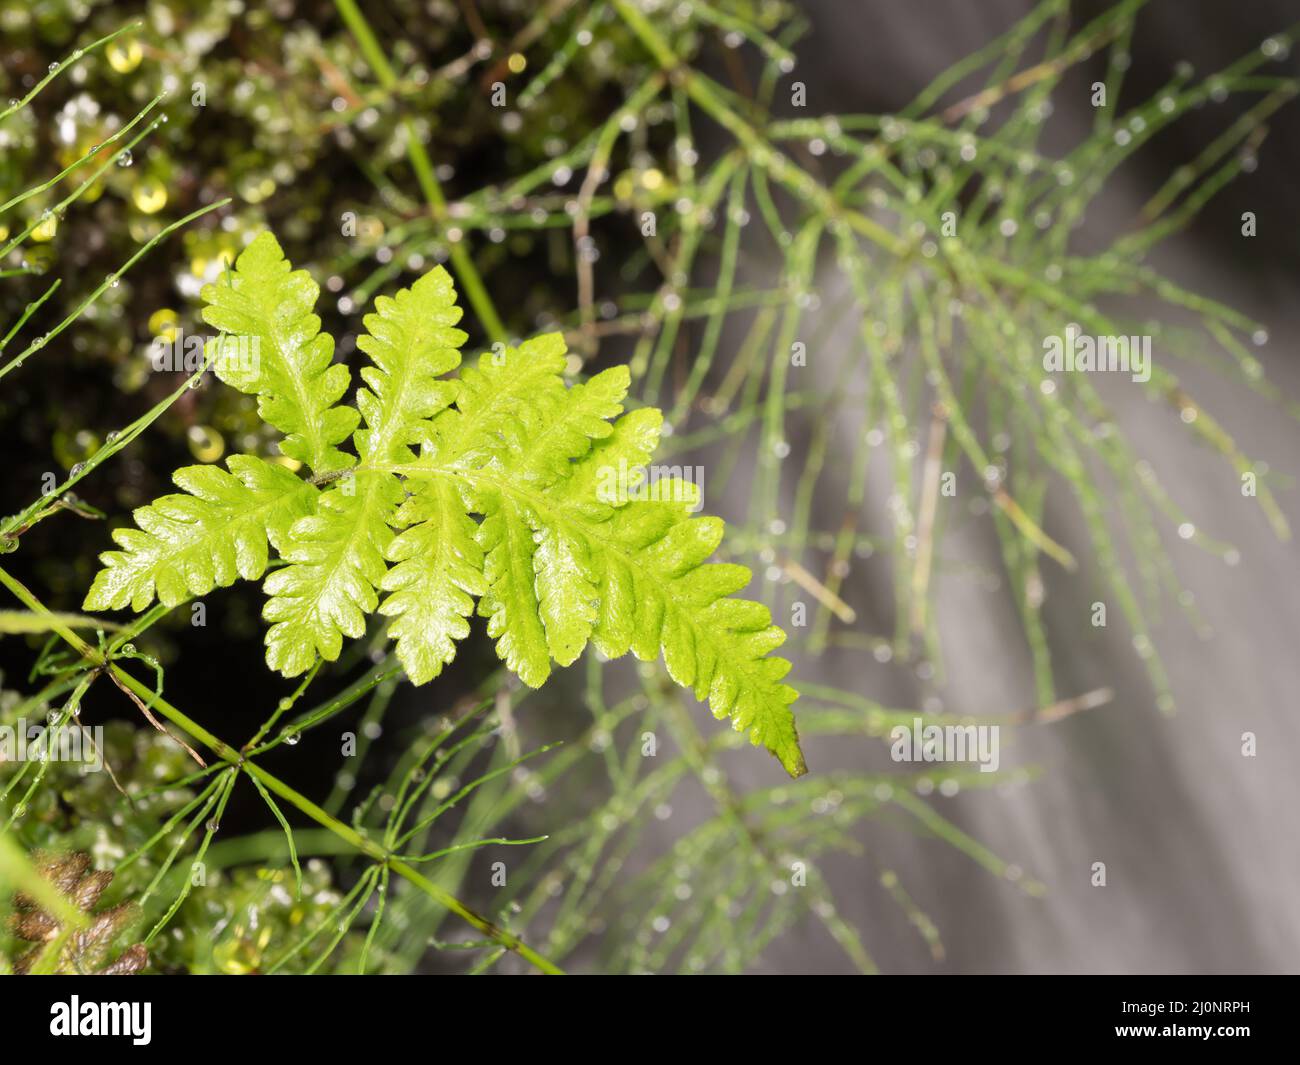 Fern growing by spring brook Stock Photo